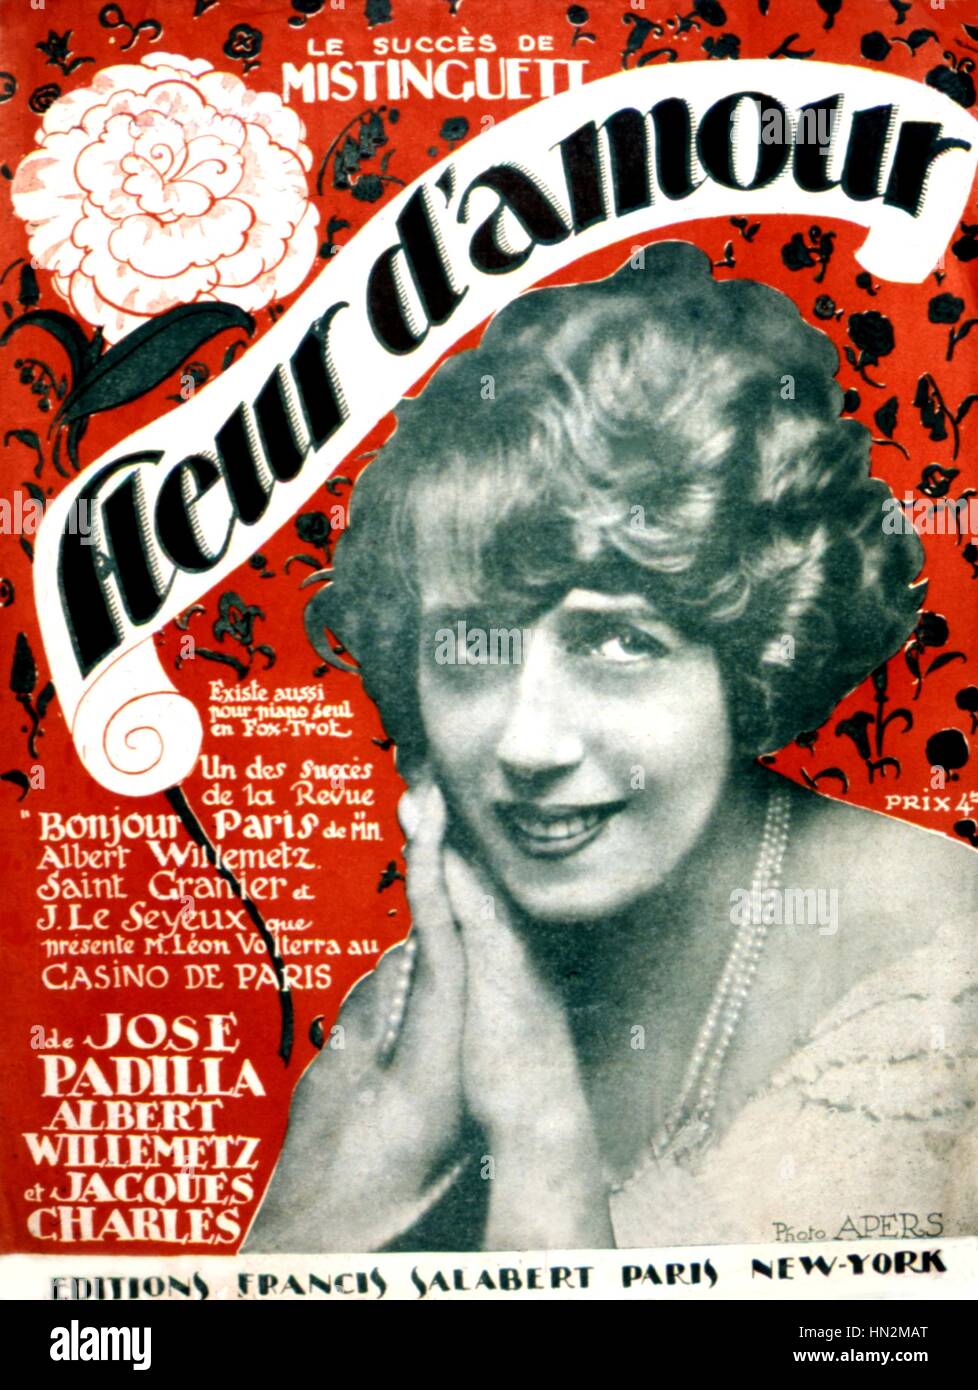 Cover for the musical edition of a song by Mistinguett: 'Fleur d'amour' (Flower of love) France 1923 Stock Photo